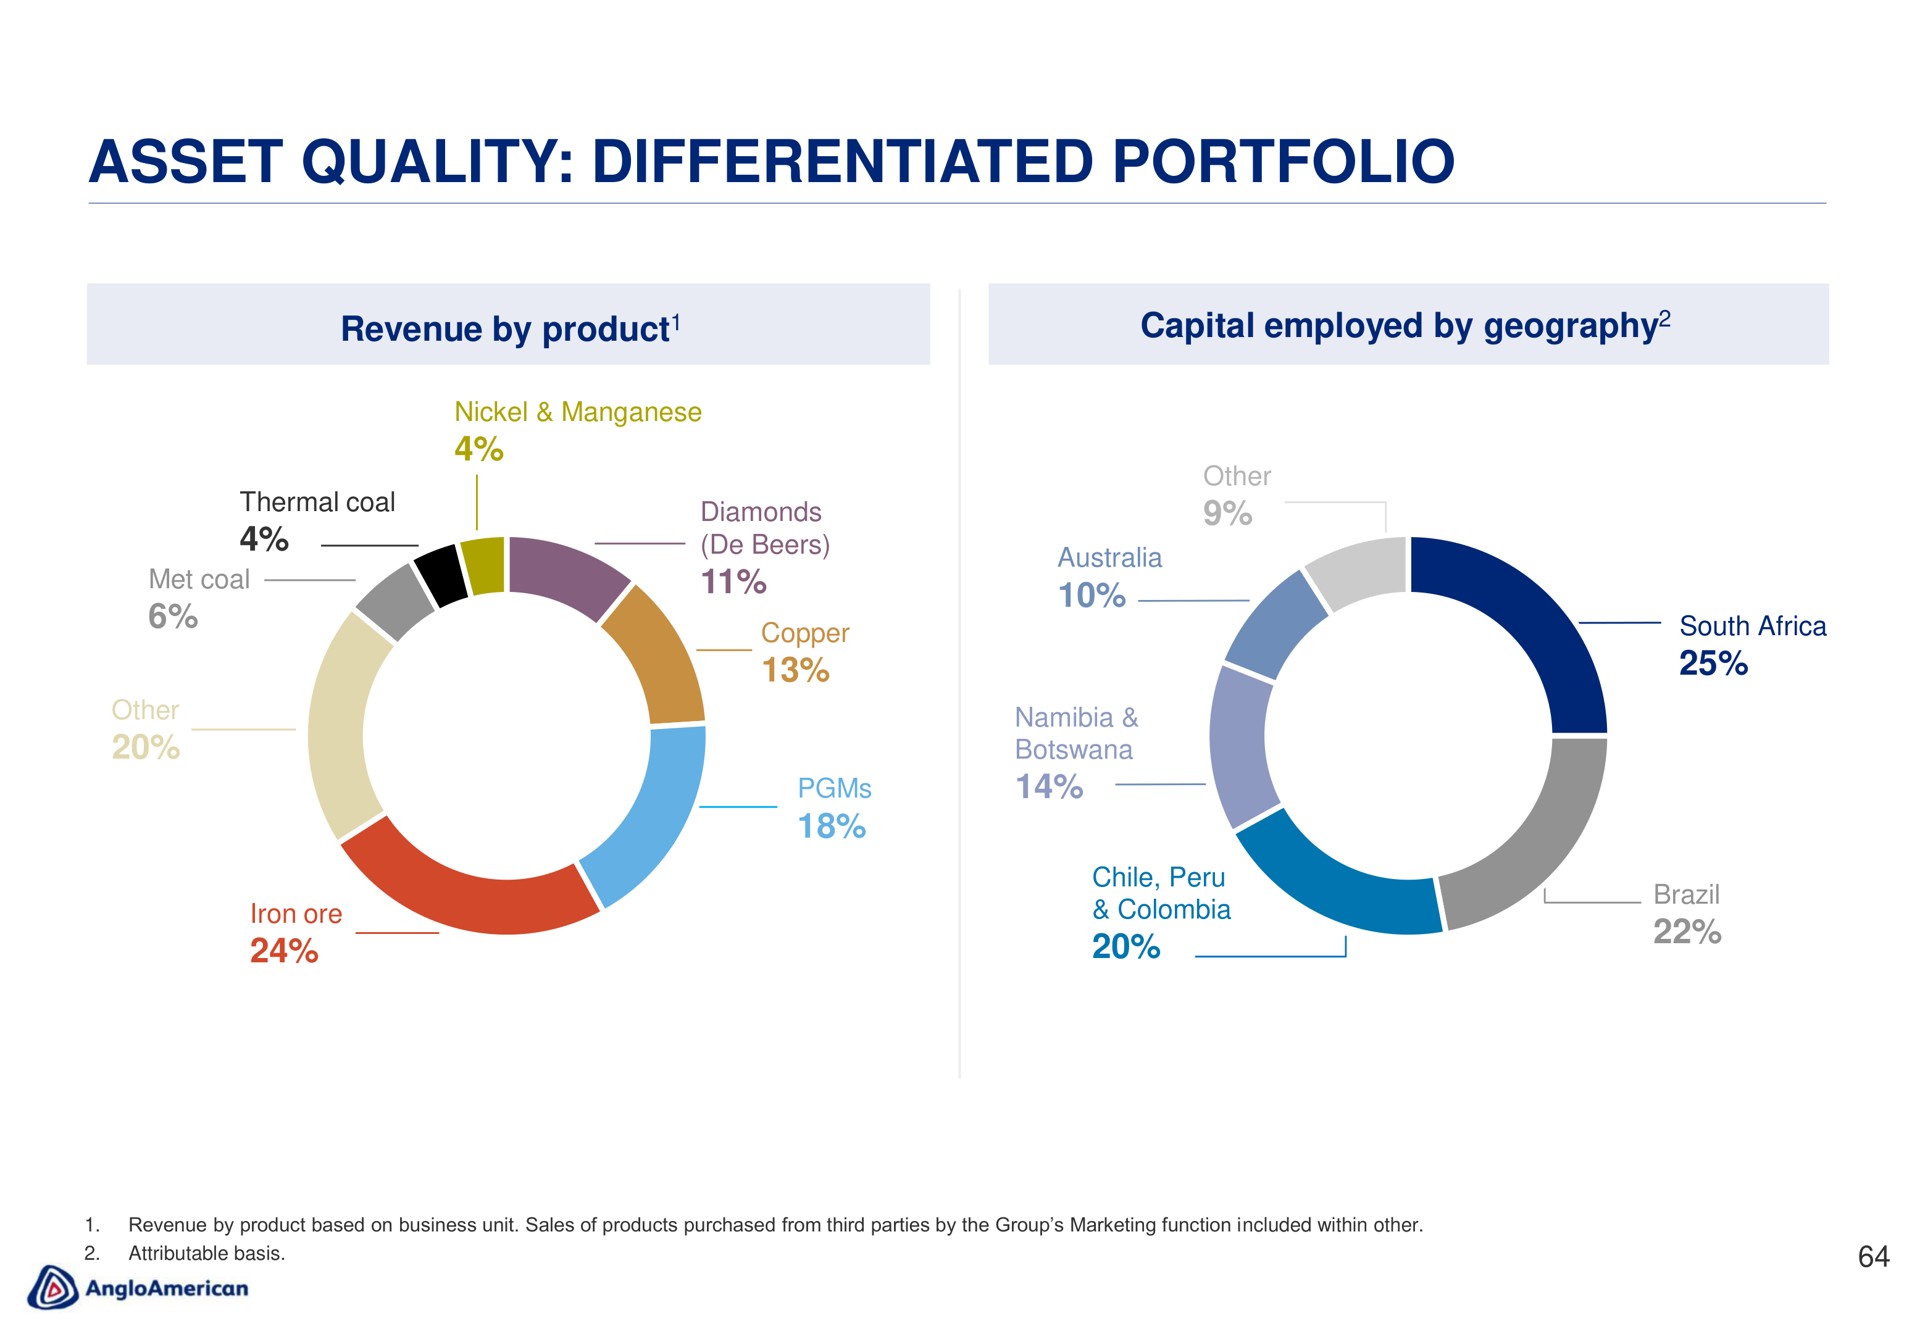 asset quality differentiated portfolio | AngloAmerican